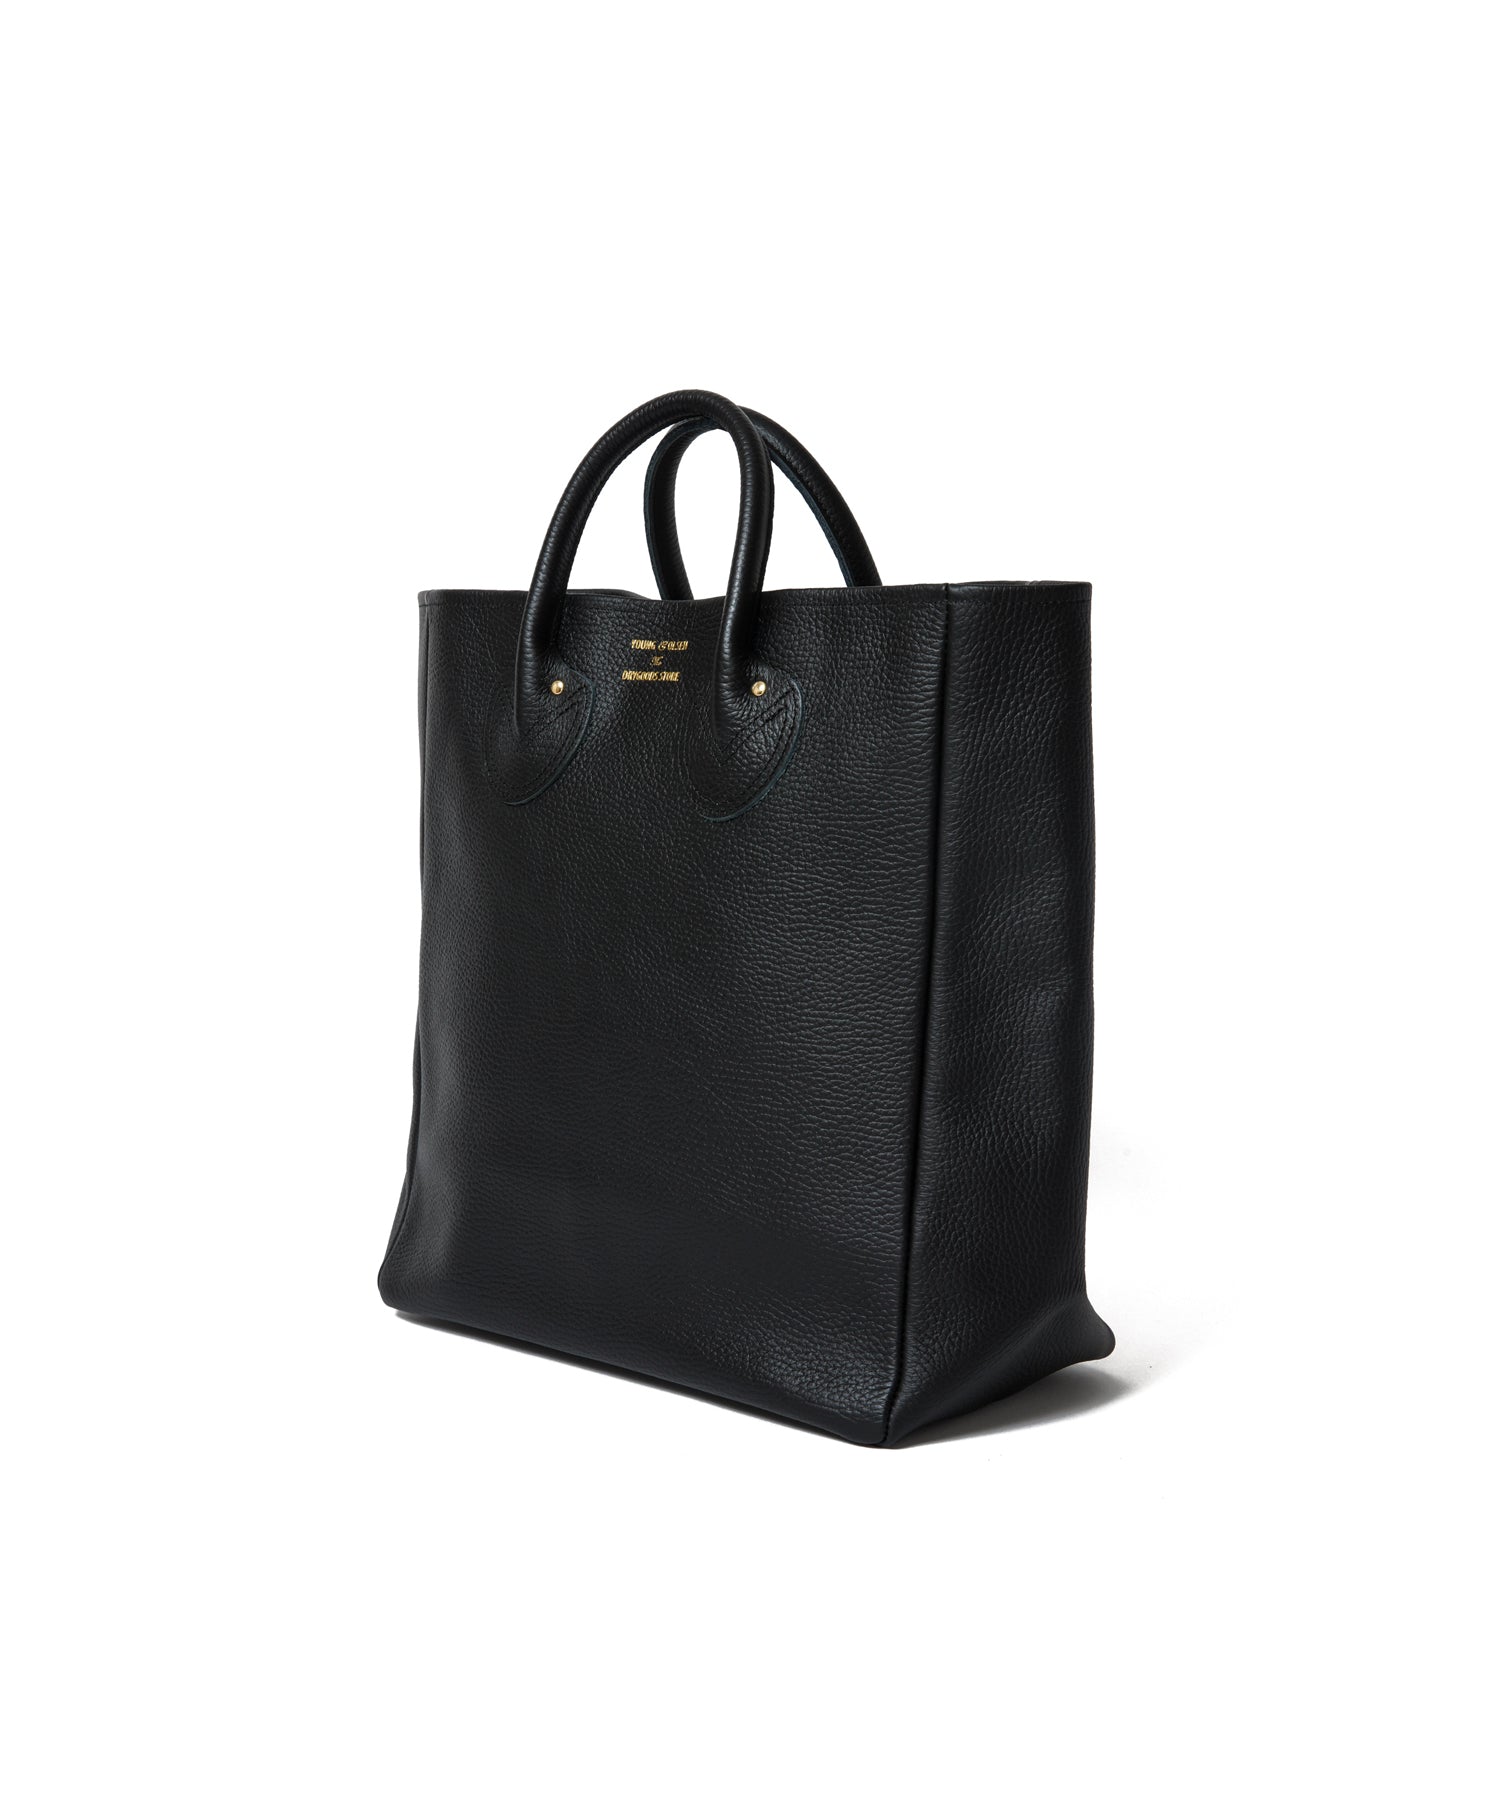 YOUNG & OLSEN TDS EMBOSSED LEATHER TOTE L - トートバッグ